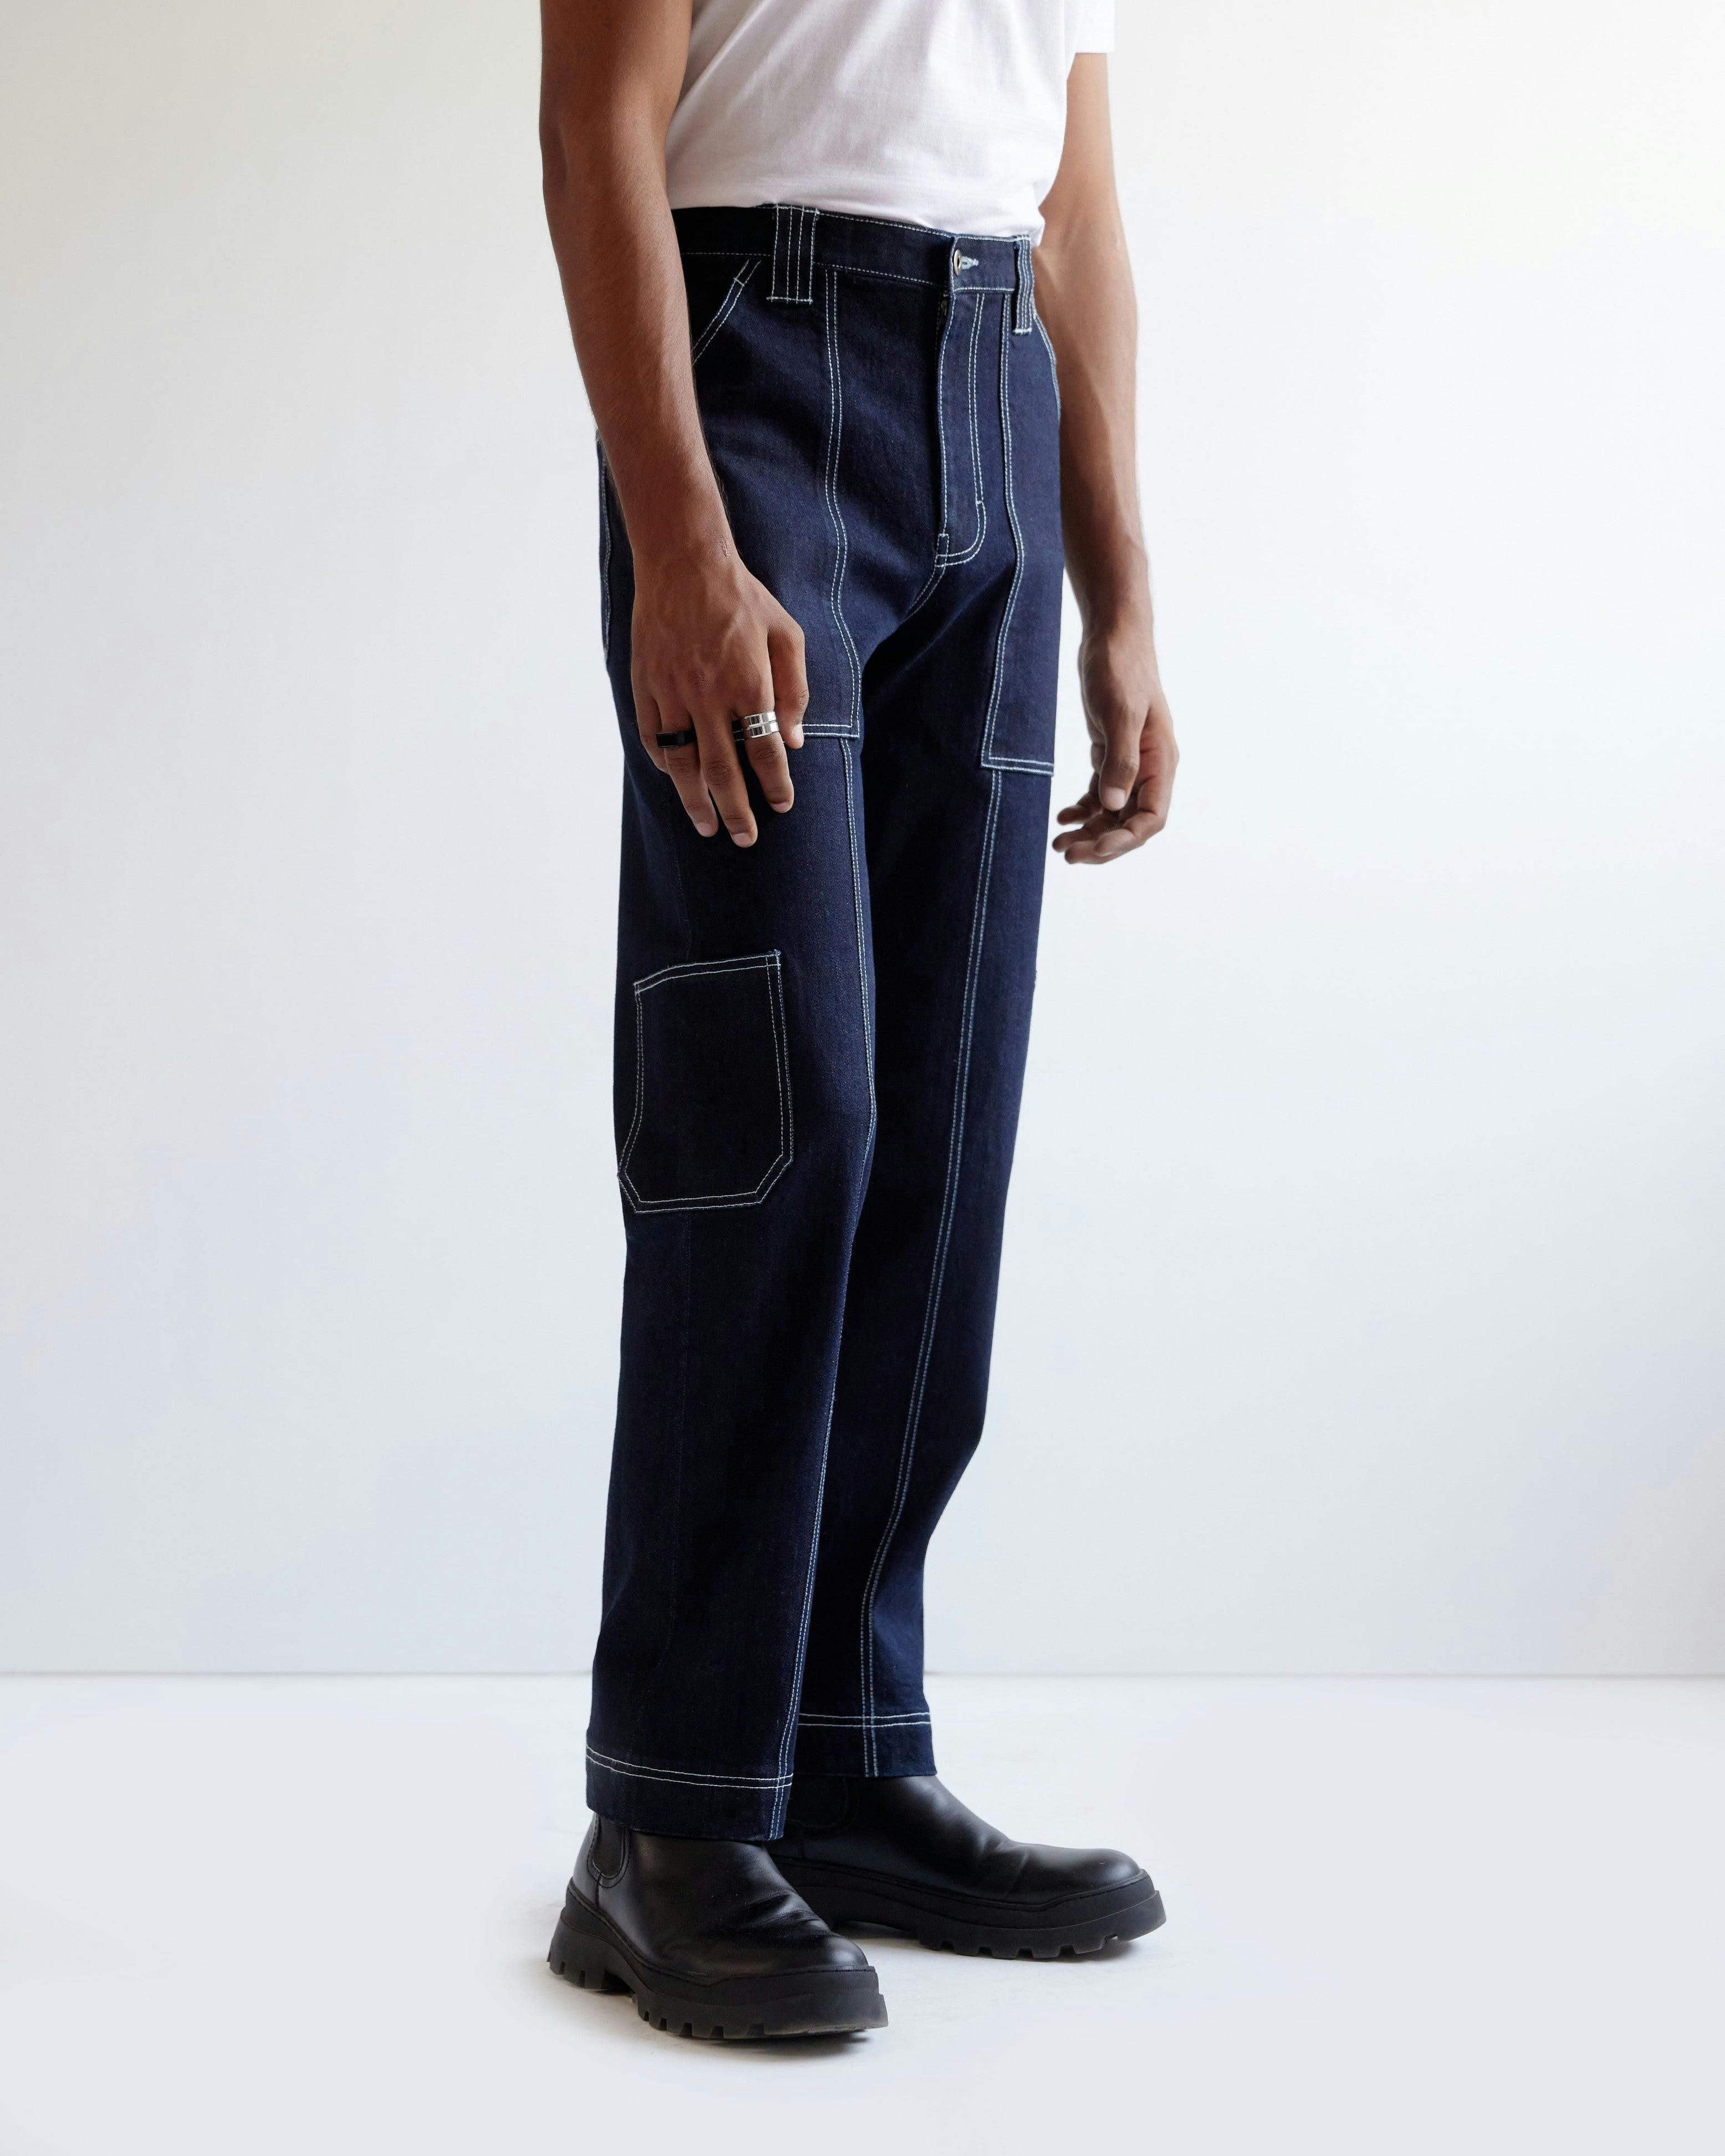 Patch Pocket Denim, a product by Country Made